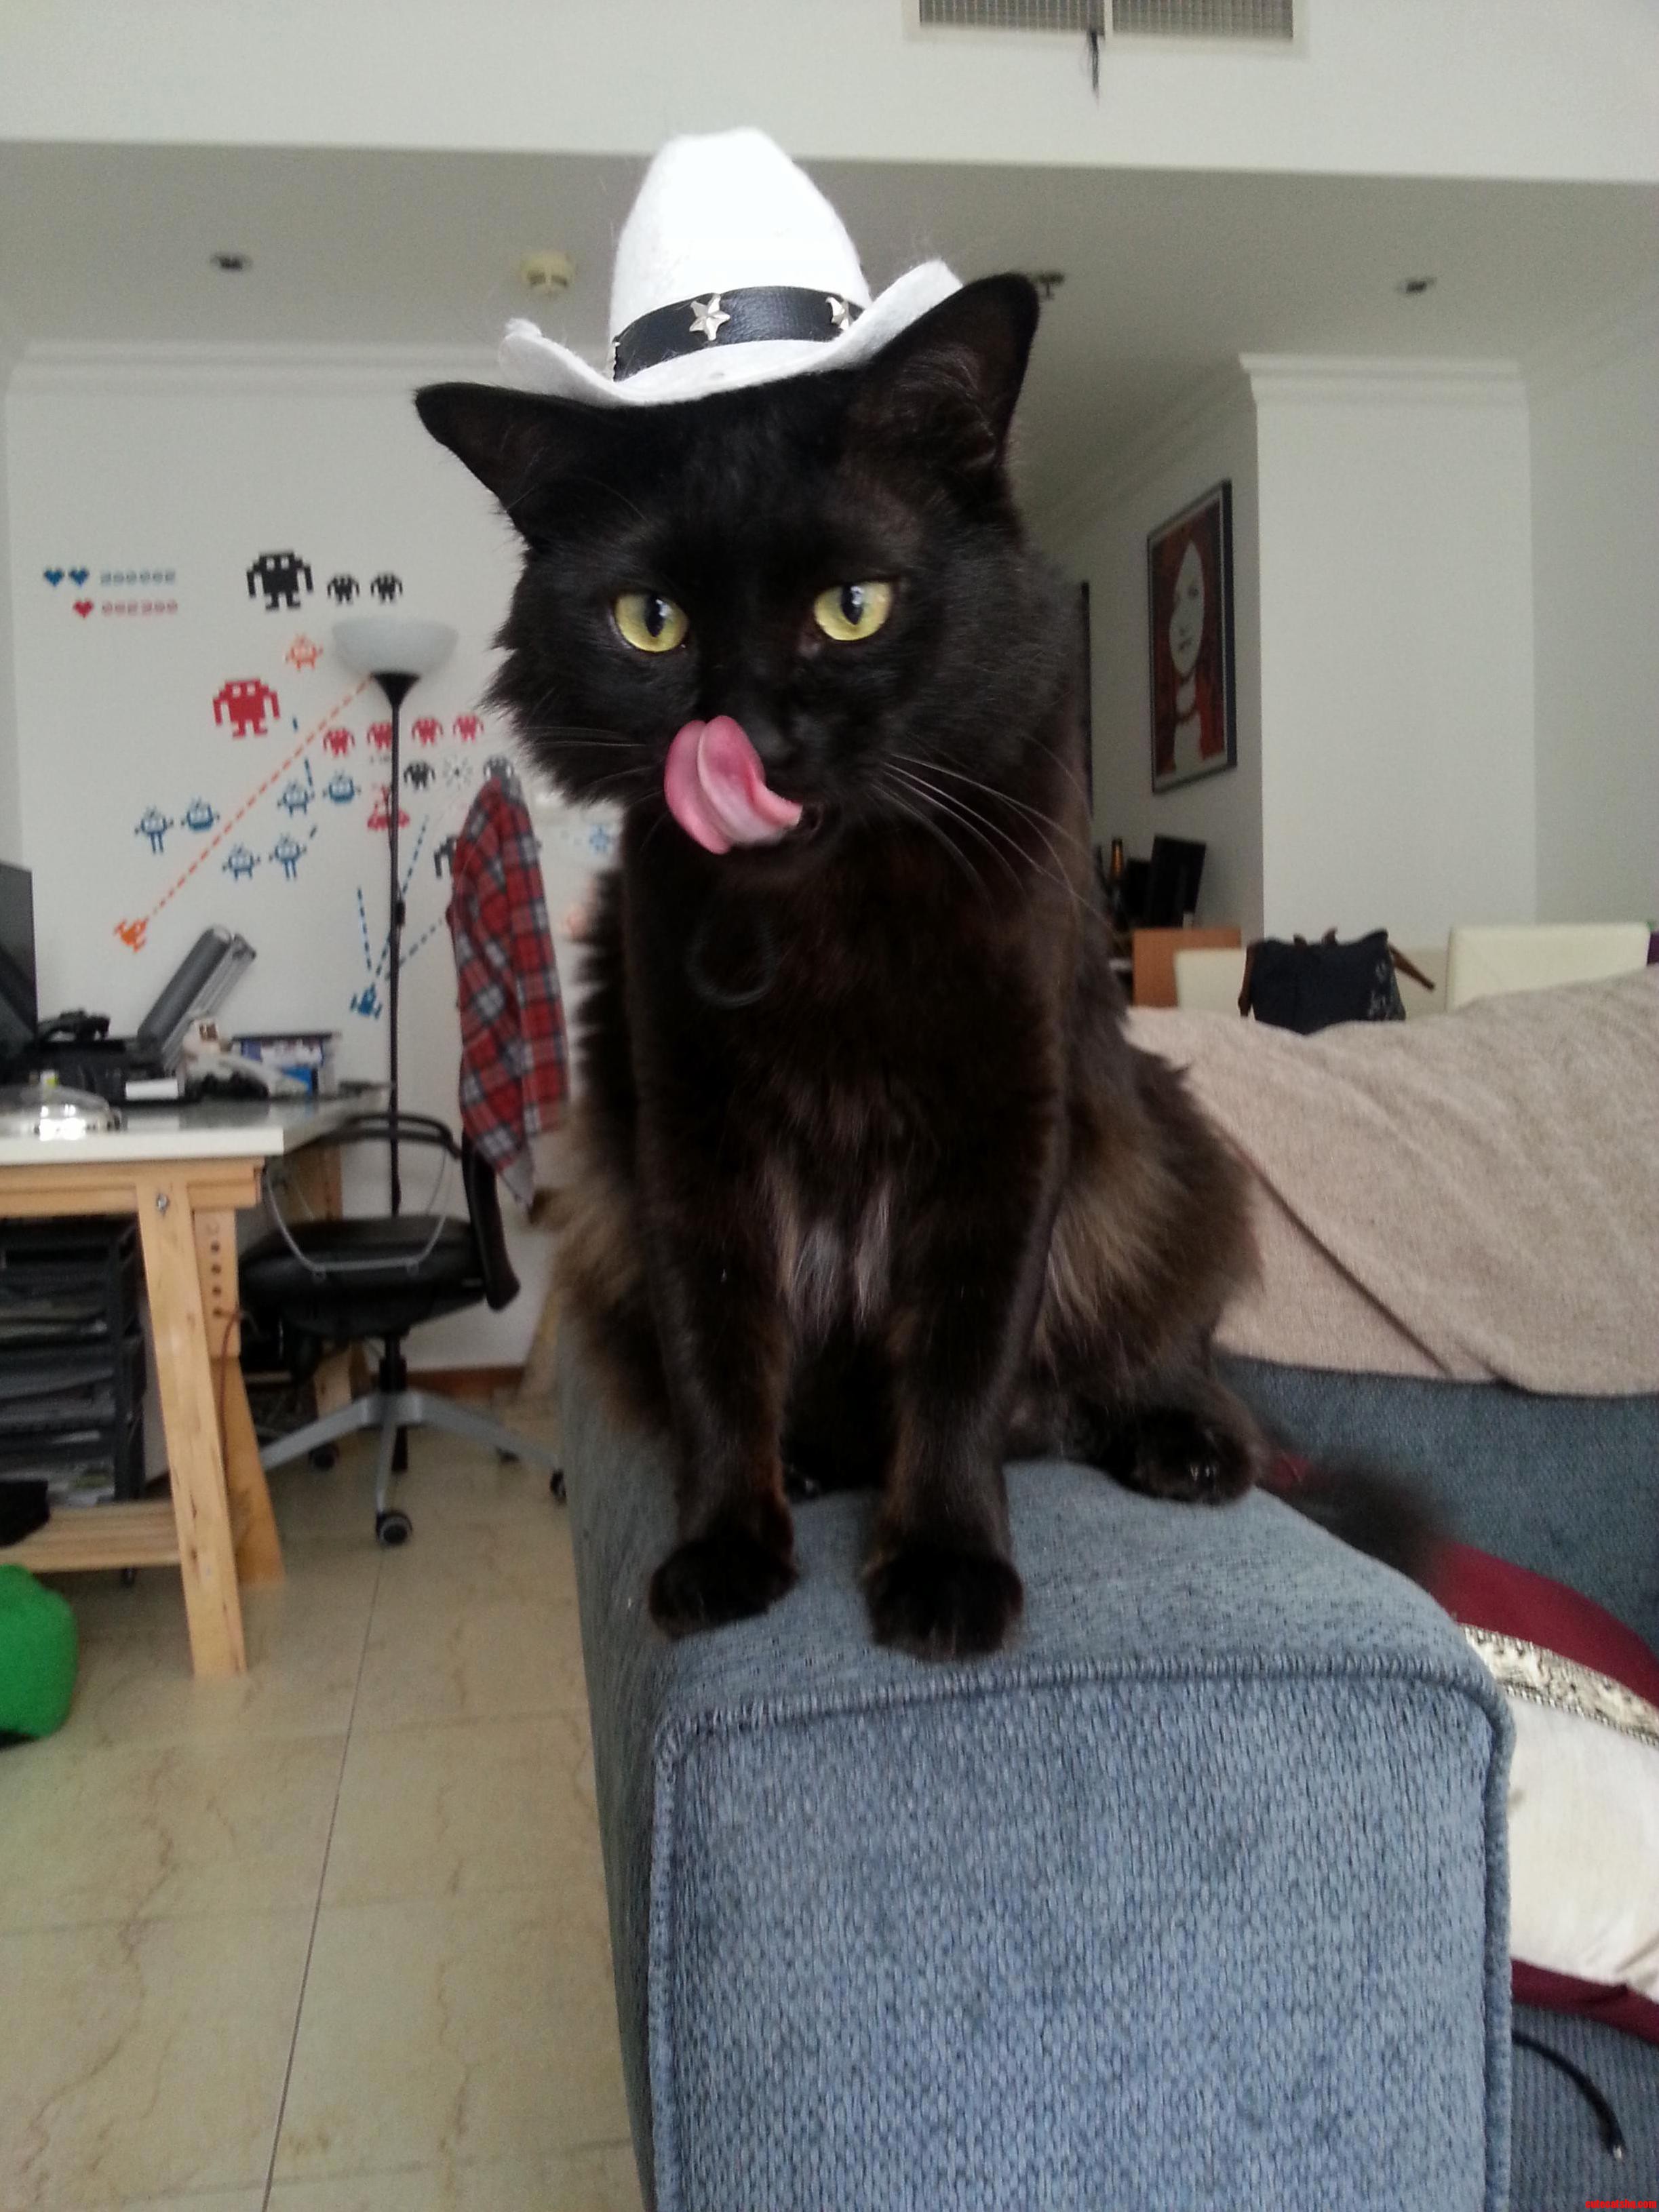 A Slightly Late Black Cat Friday Post – Our Cowboy Katsu